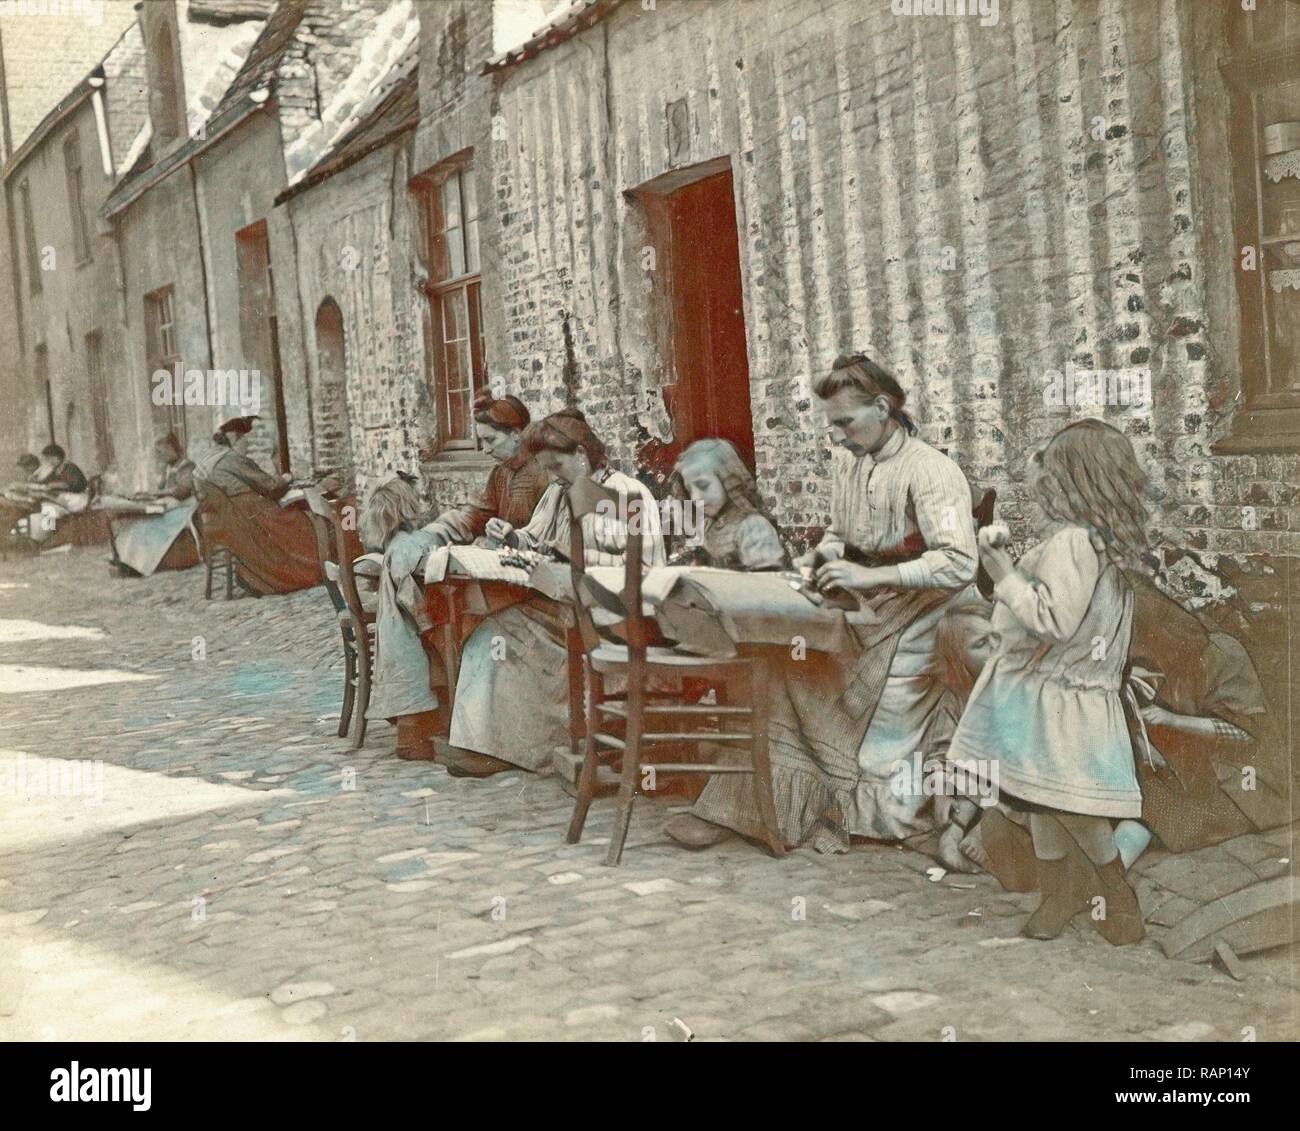 Street and women lacemaking, Anonymous, c. 1900. Reimagined by Gibon. Classic art with a modern twist reimagined Stock Photo